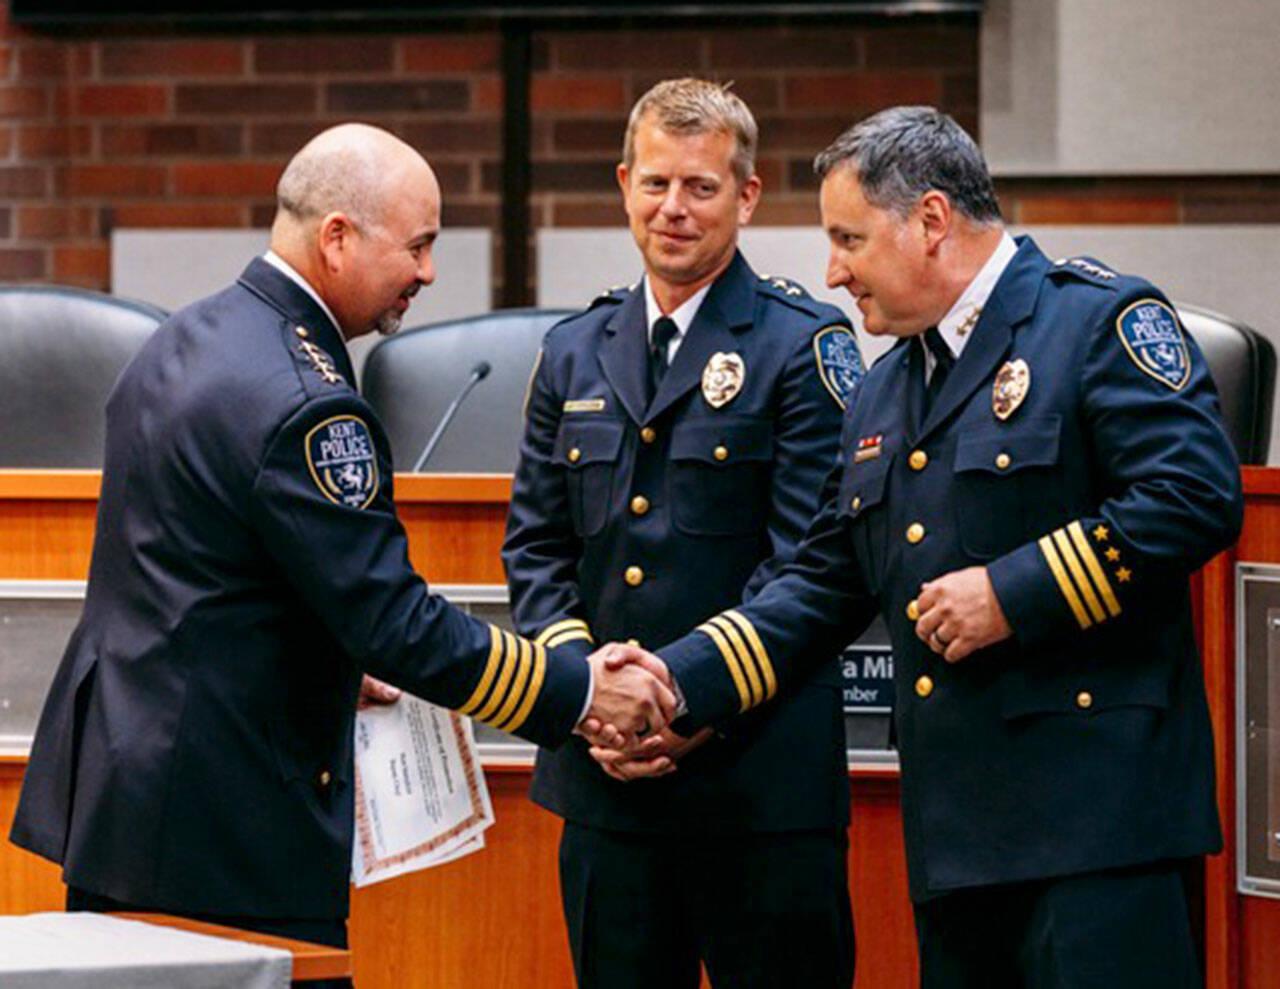 Kent Police Chief Rafael Padilla, left, congratulates new Deputy Chief Matt Stansfield as new Assistant Chief Andy Grove looks on during a promotion ceremony. COURTESY PHOTO, Kent Police